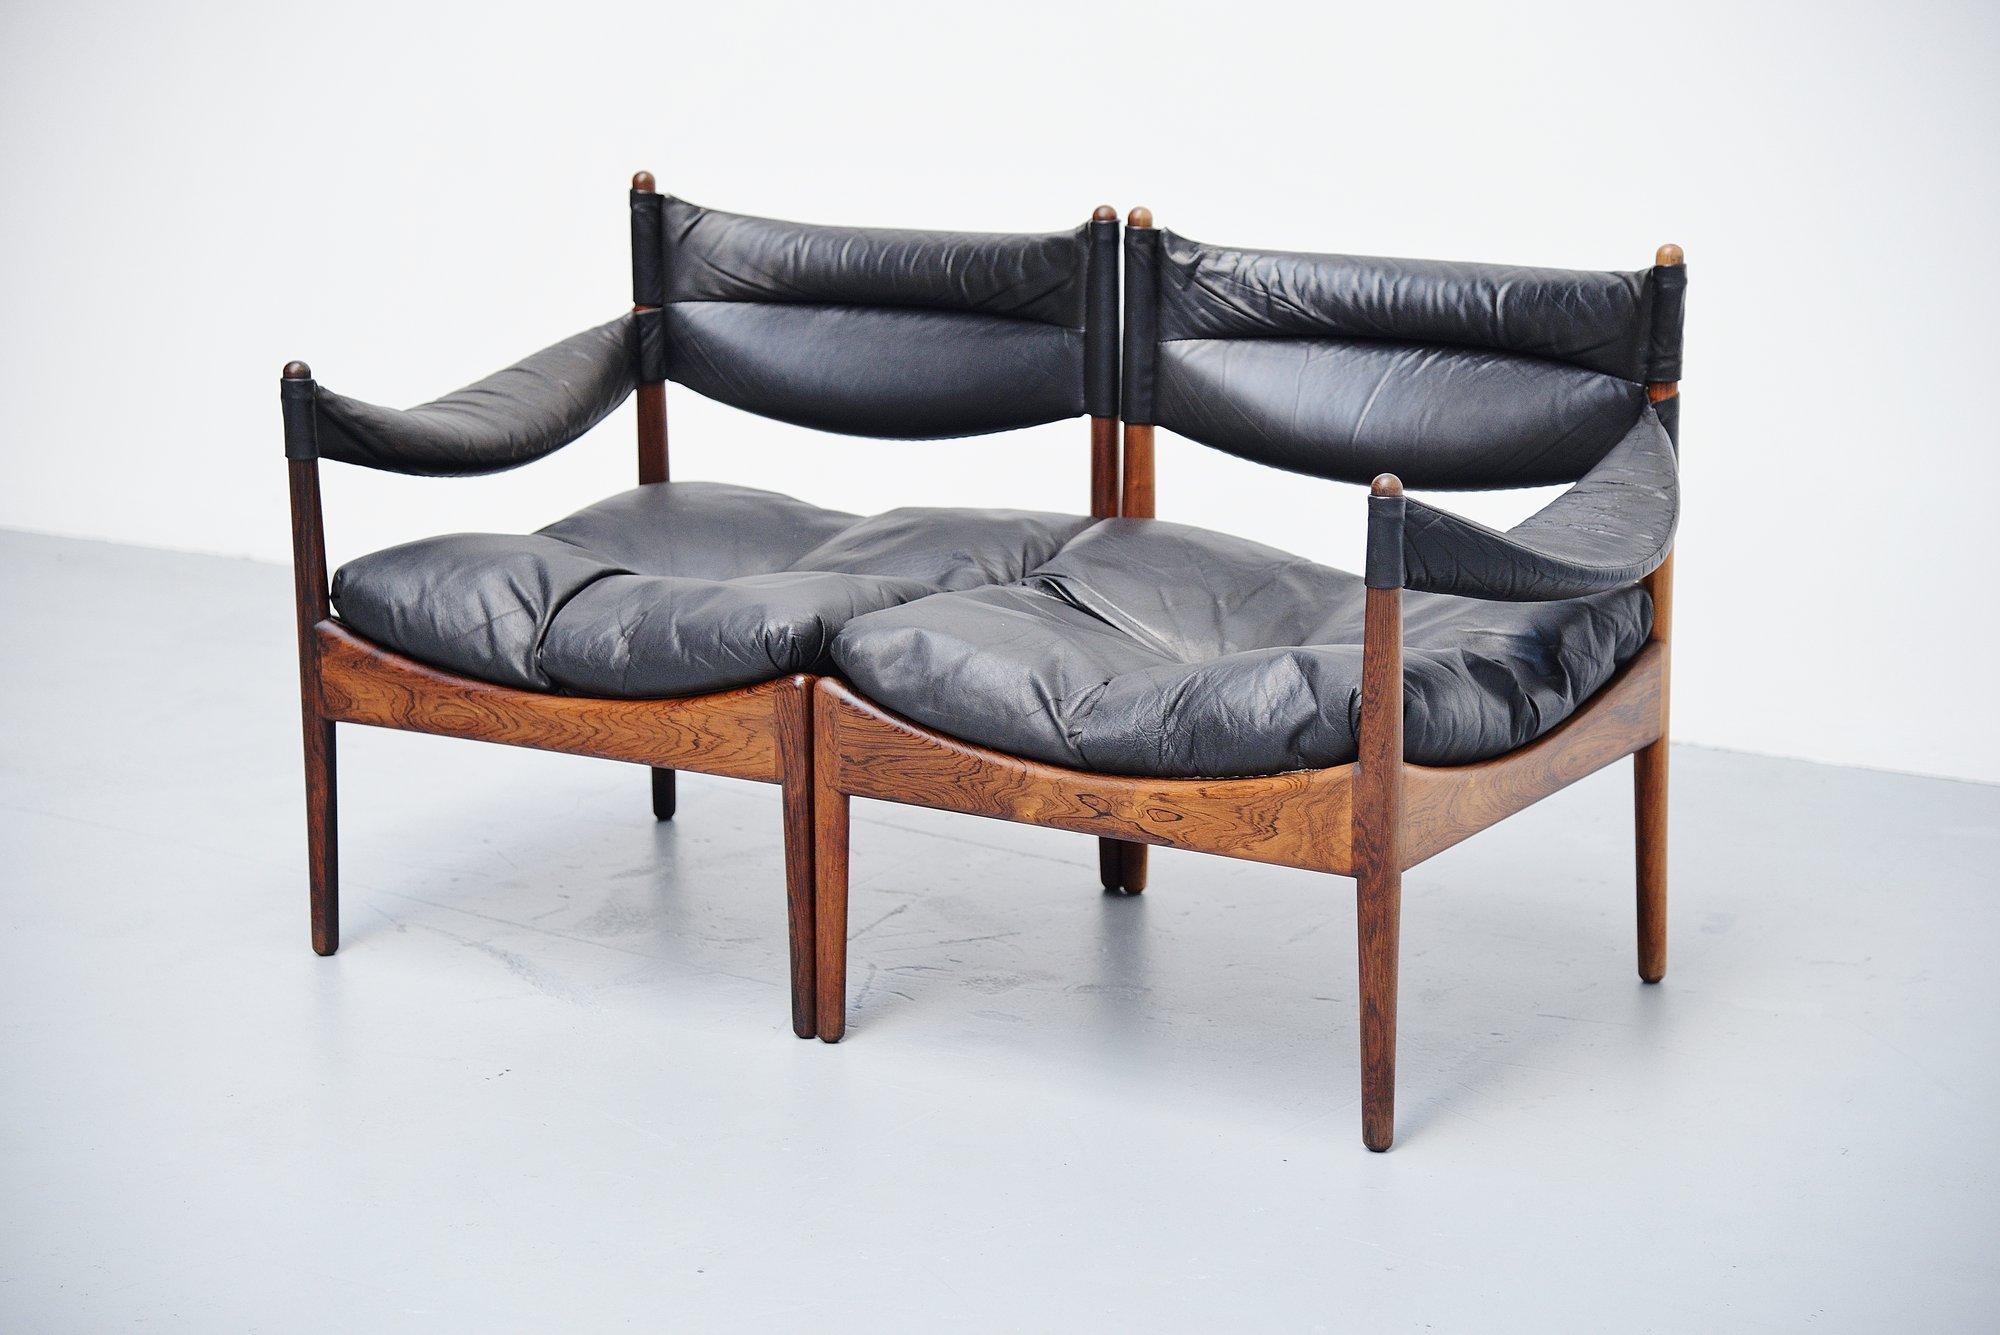 Very small modular 2-seat sofa from the Modus series designed by Kristian Solmer Vedel and manufactured by Soren Willadsen, Denmark 1963. These elements have solid rosewood frames and black leather upholstery. The chairs are in very good original